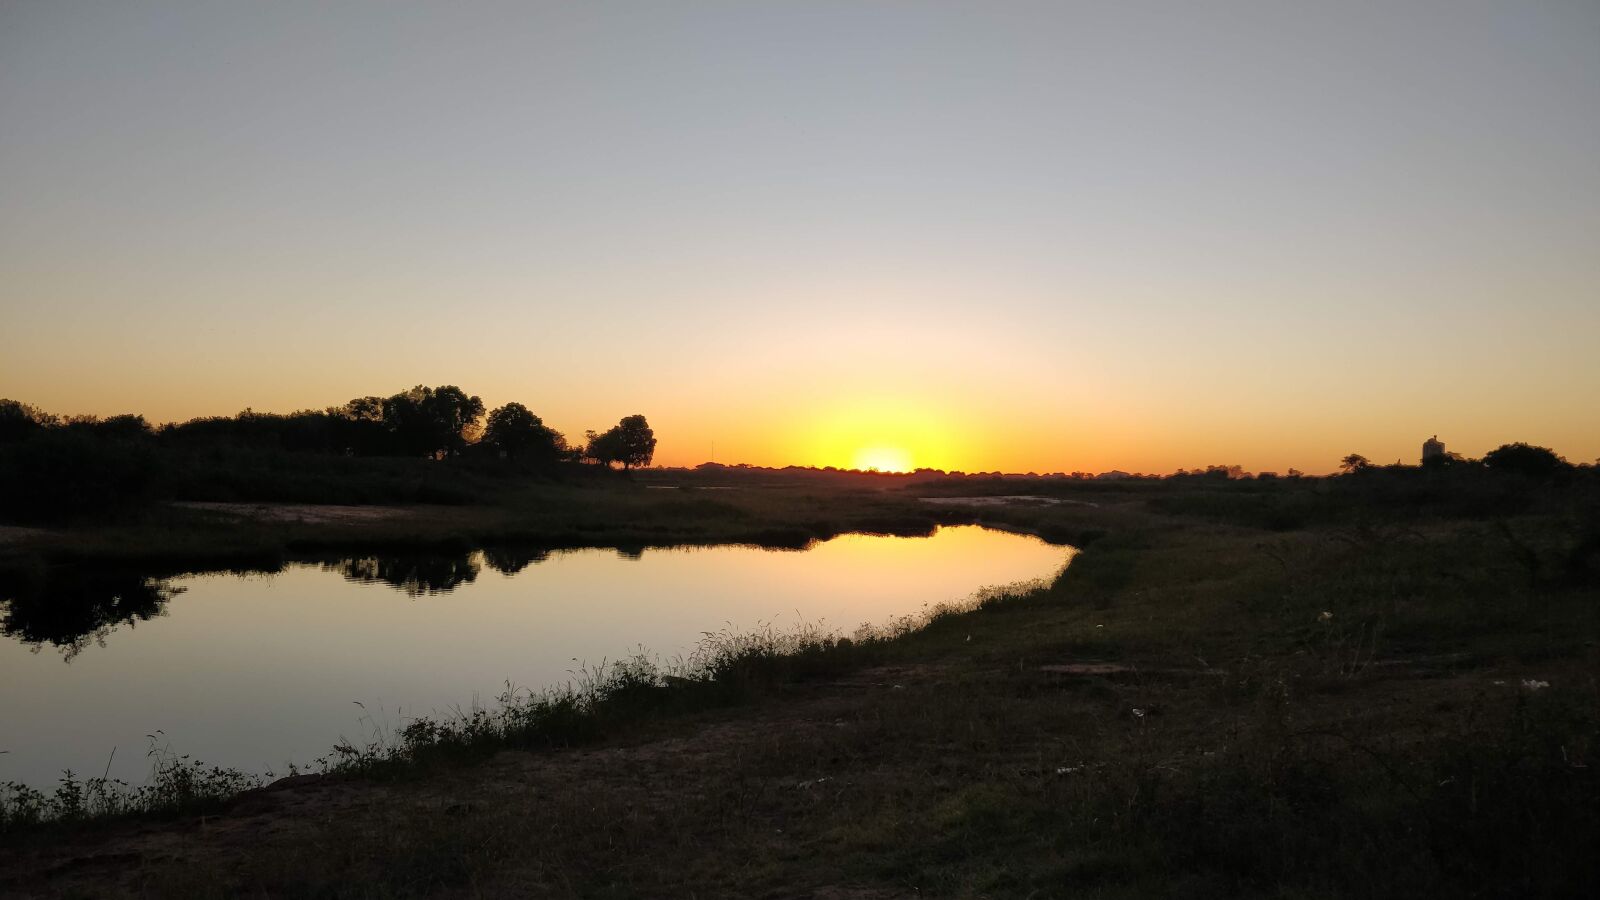 OnePlus A5000 sample photo. Paraguay river, sunset, sun photography